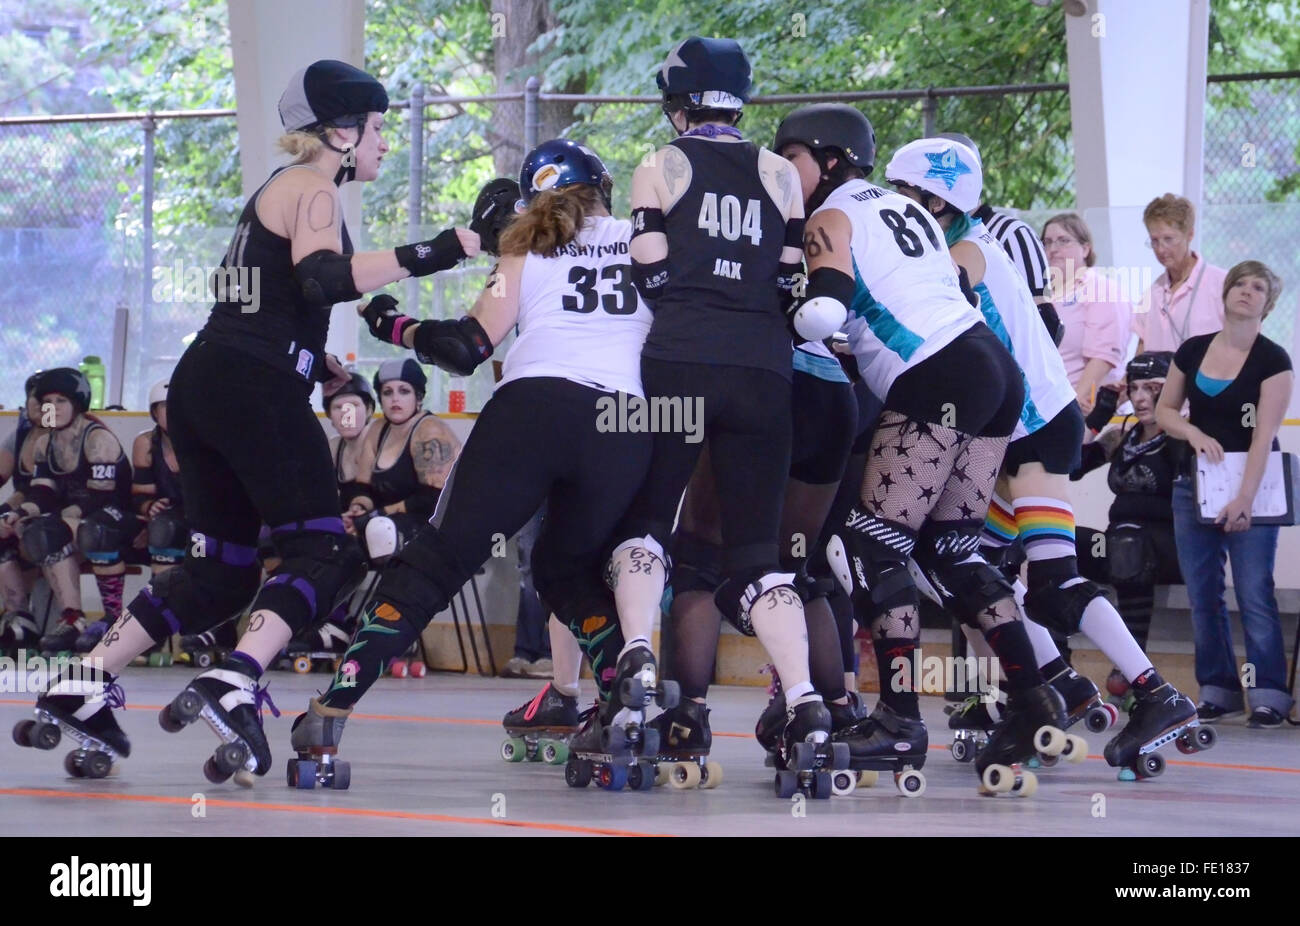 ANN ARBOR, MI - AUGUST 2: Arbor Bruising Co. and Grand Raggidy G-Rap Attack! jammers try to push into the pack during their bout Stock Photo